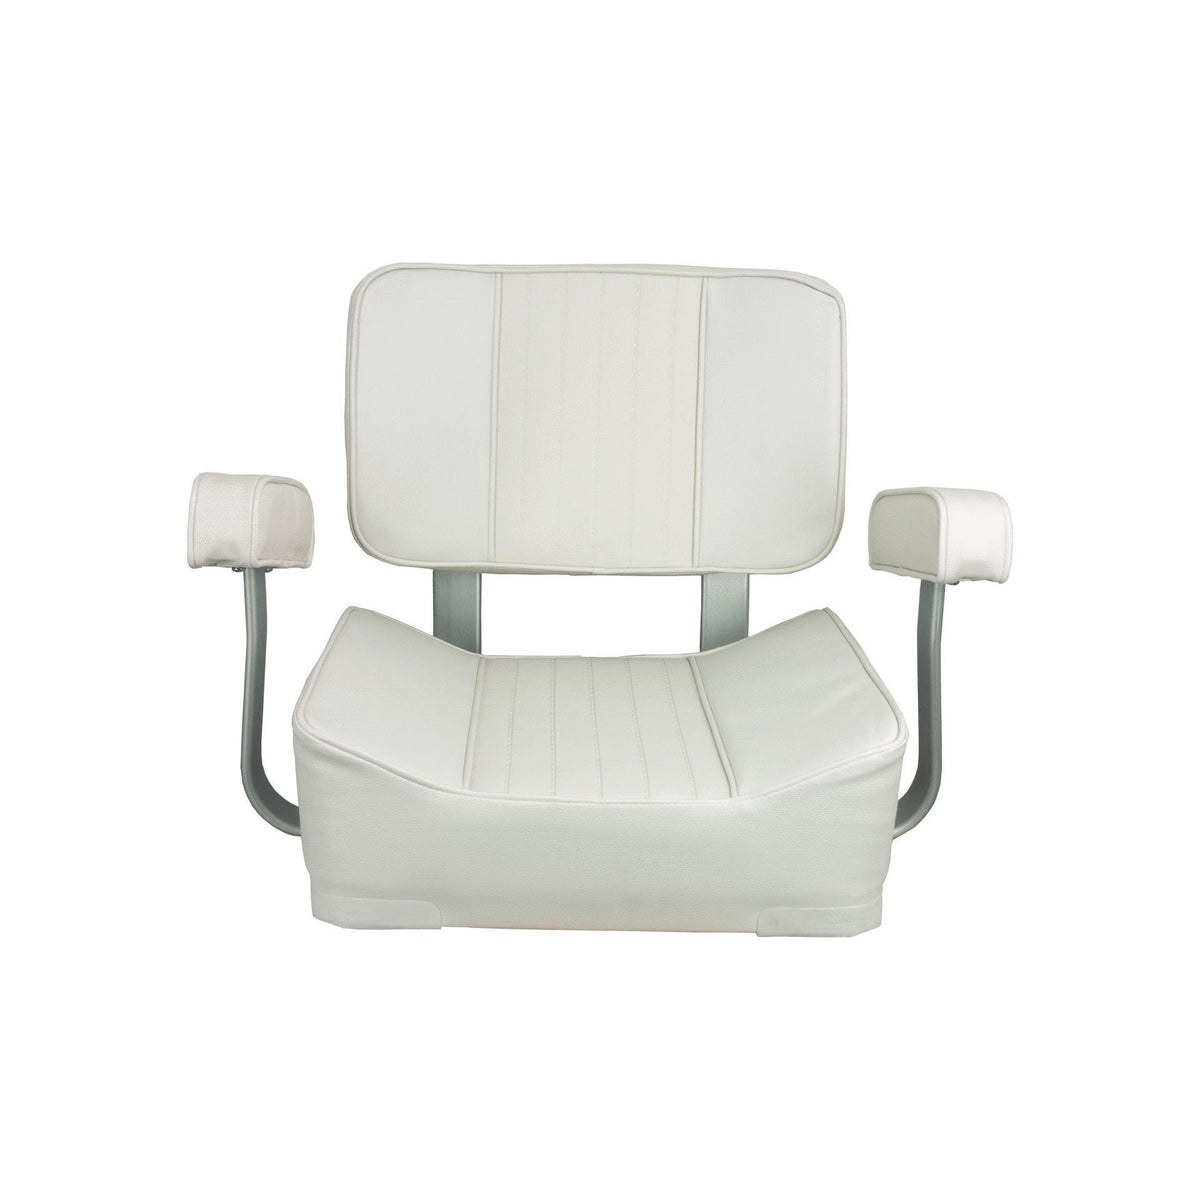 Springfield Oversized - Not Qualified for Free Shipping Springfield Deluxe Captain's Chair White #1040002